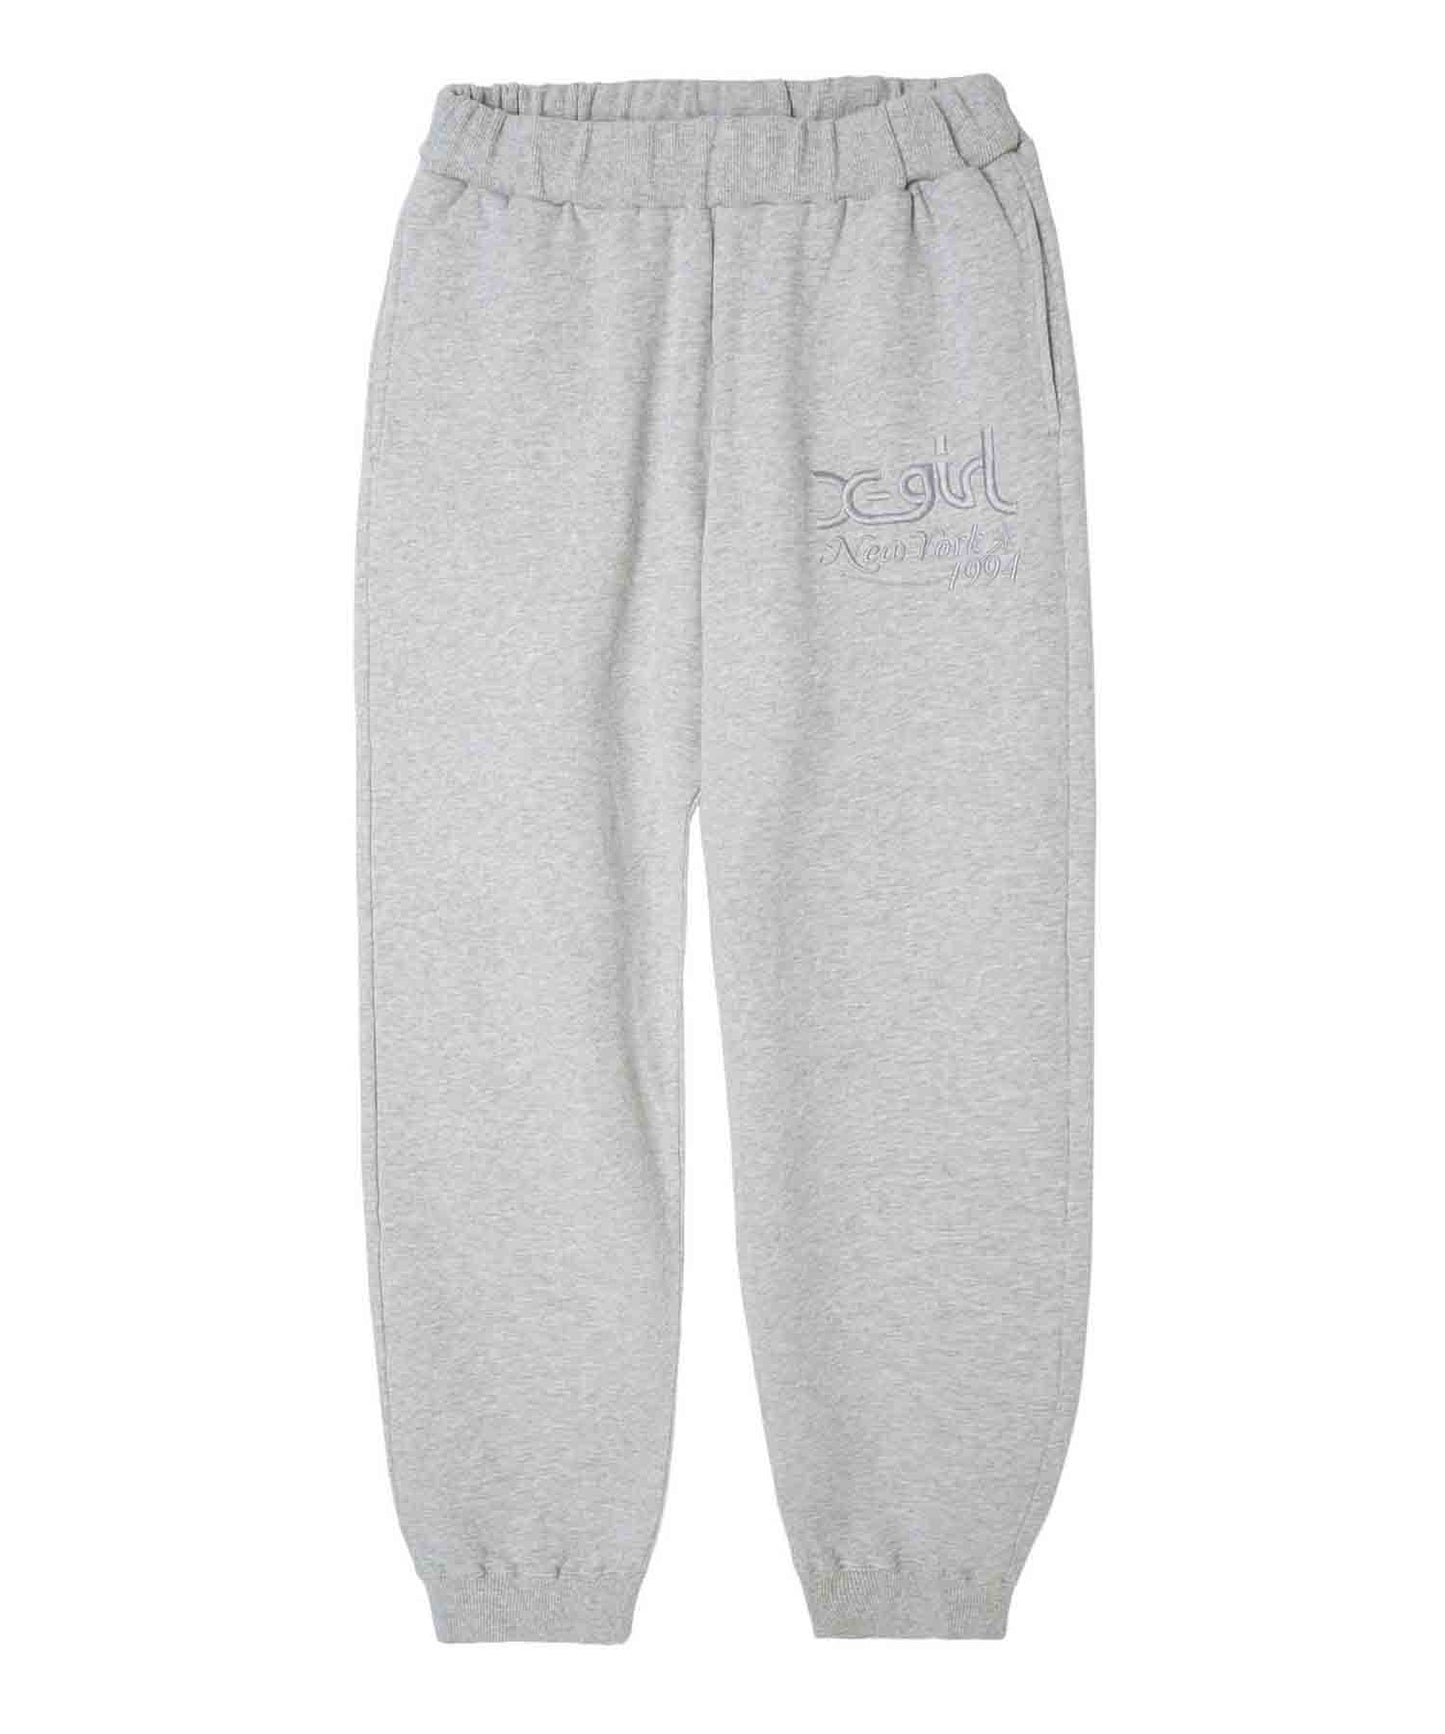 EMBROIDERED MILLS LOGO SWEAT PANTS